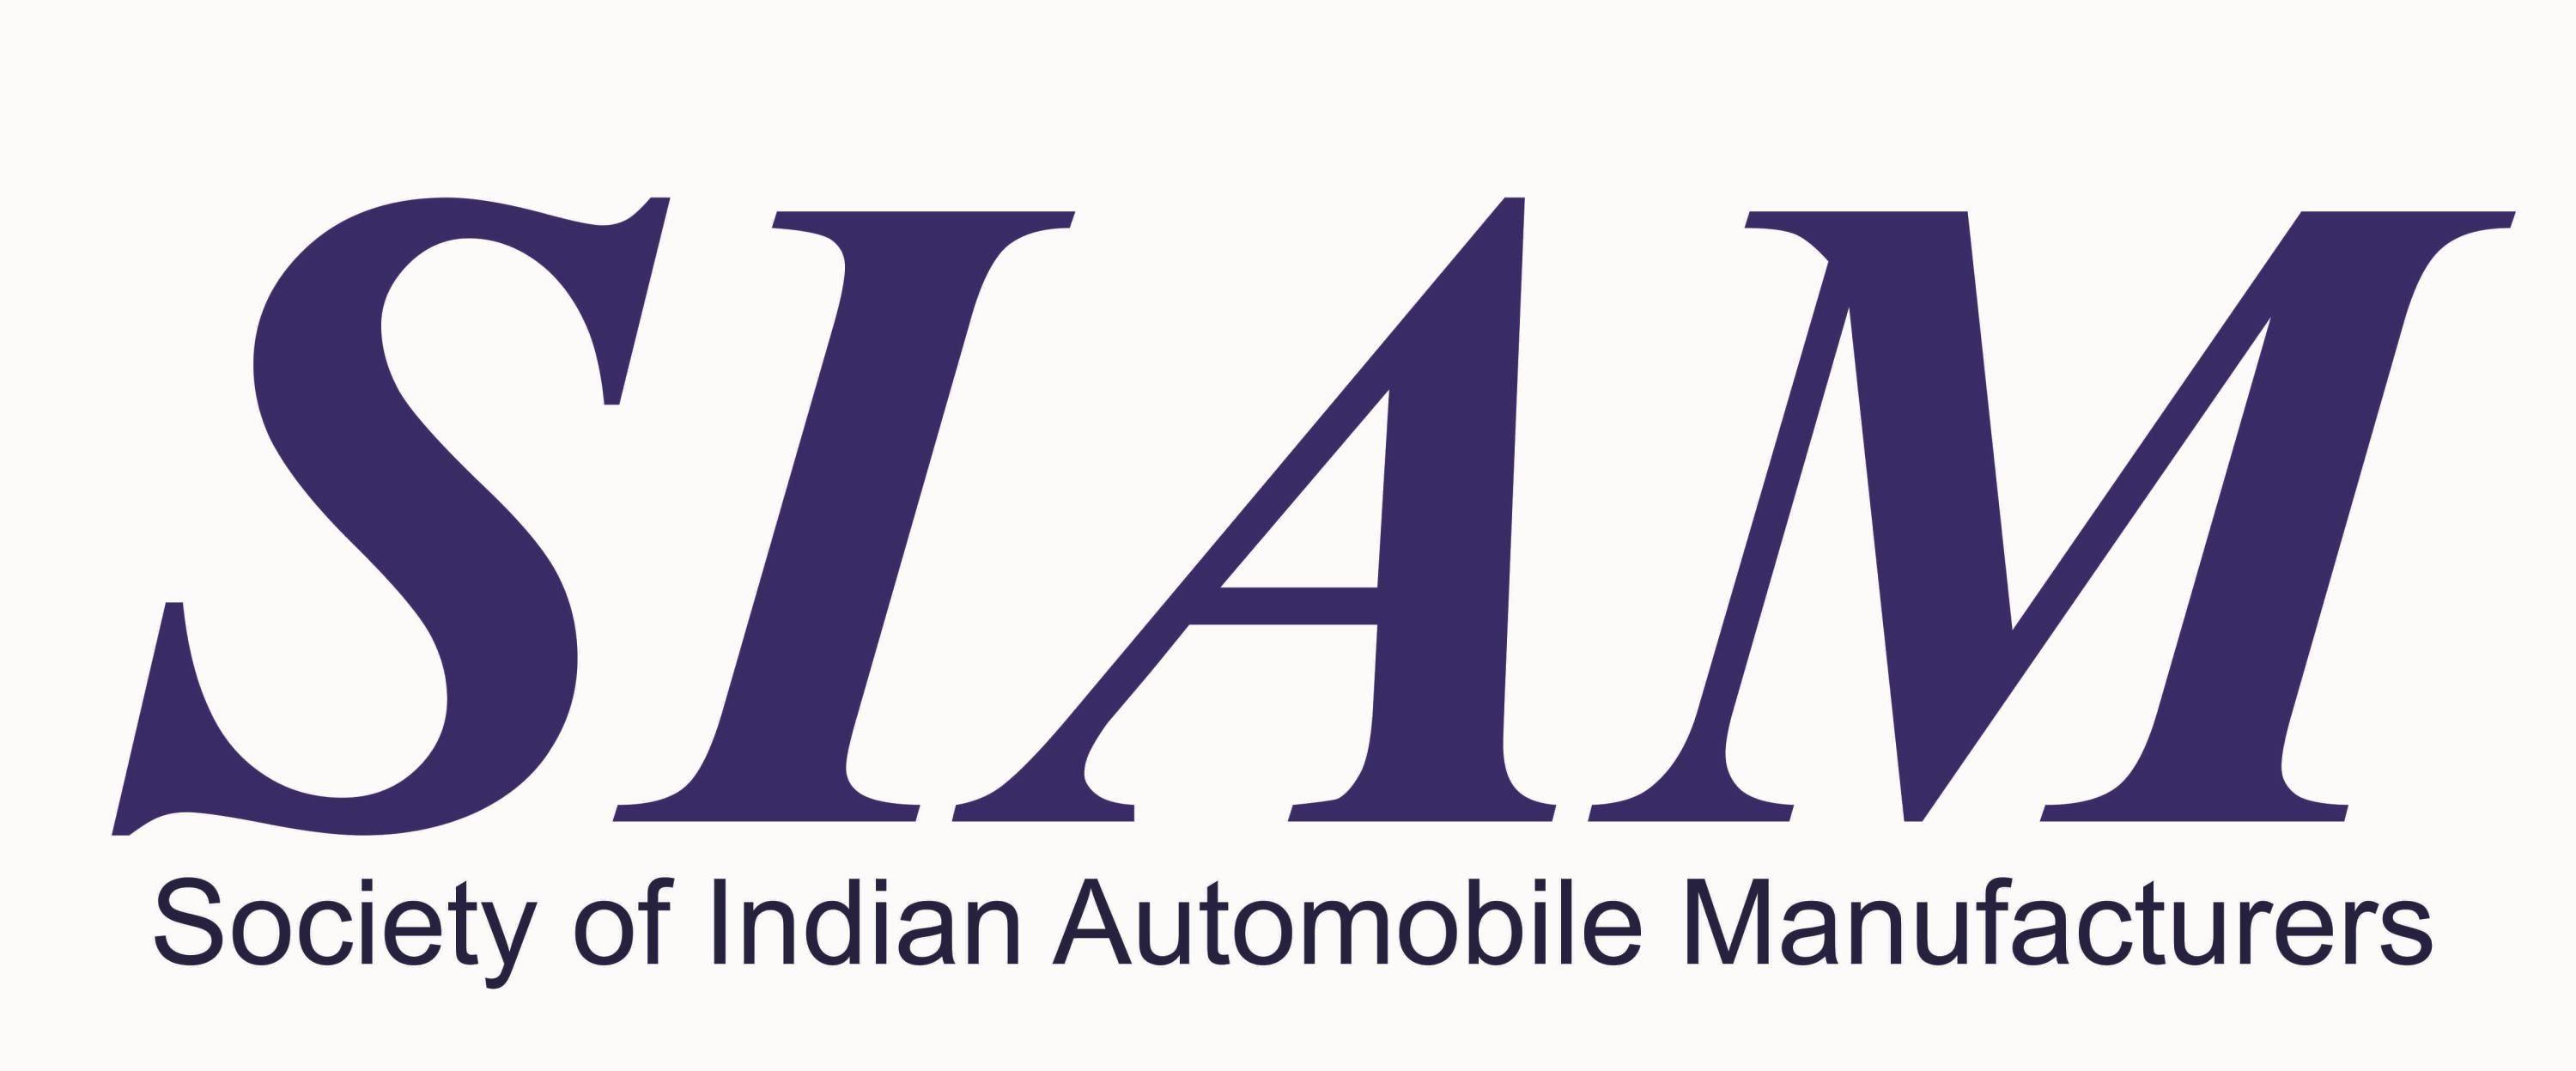 Indian Automotive Logo - Indian Auto Industry would abide by the Supreme Court Order